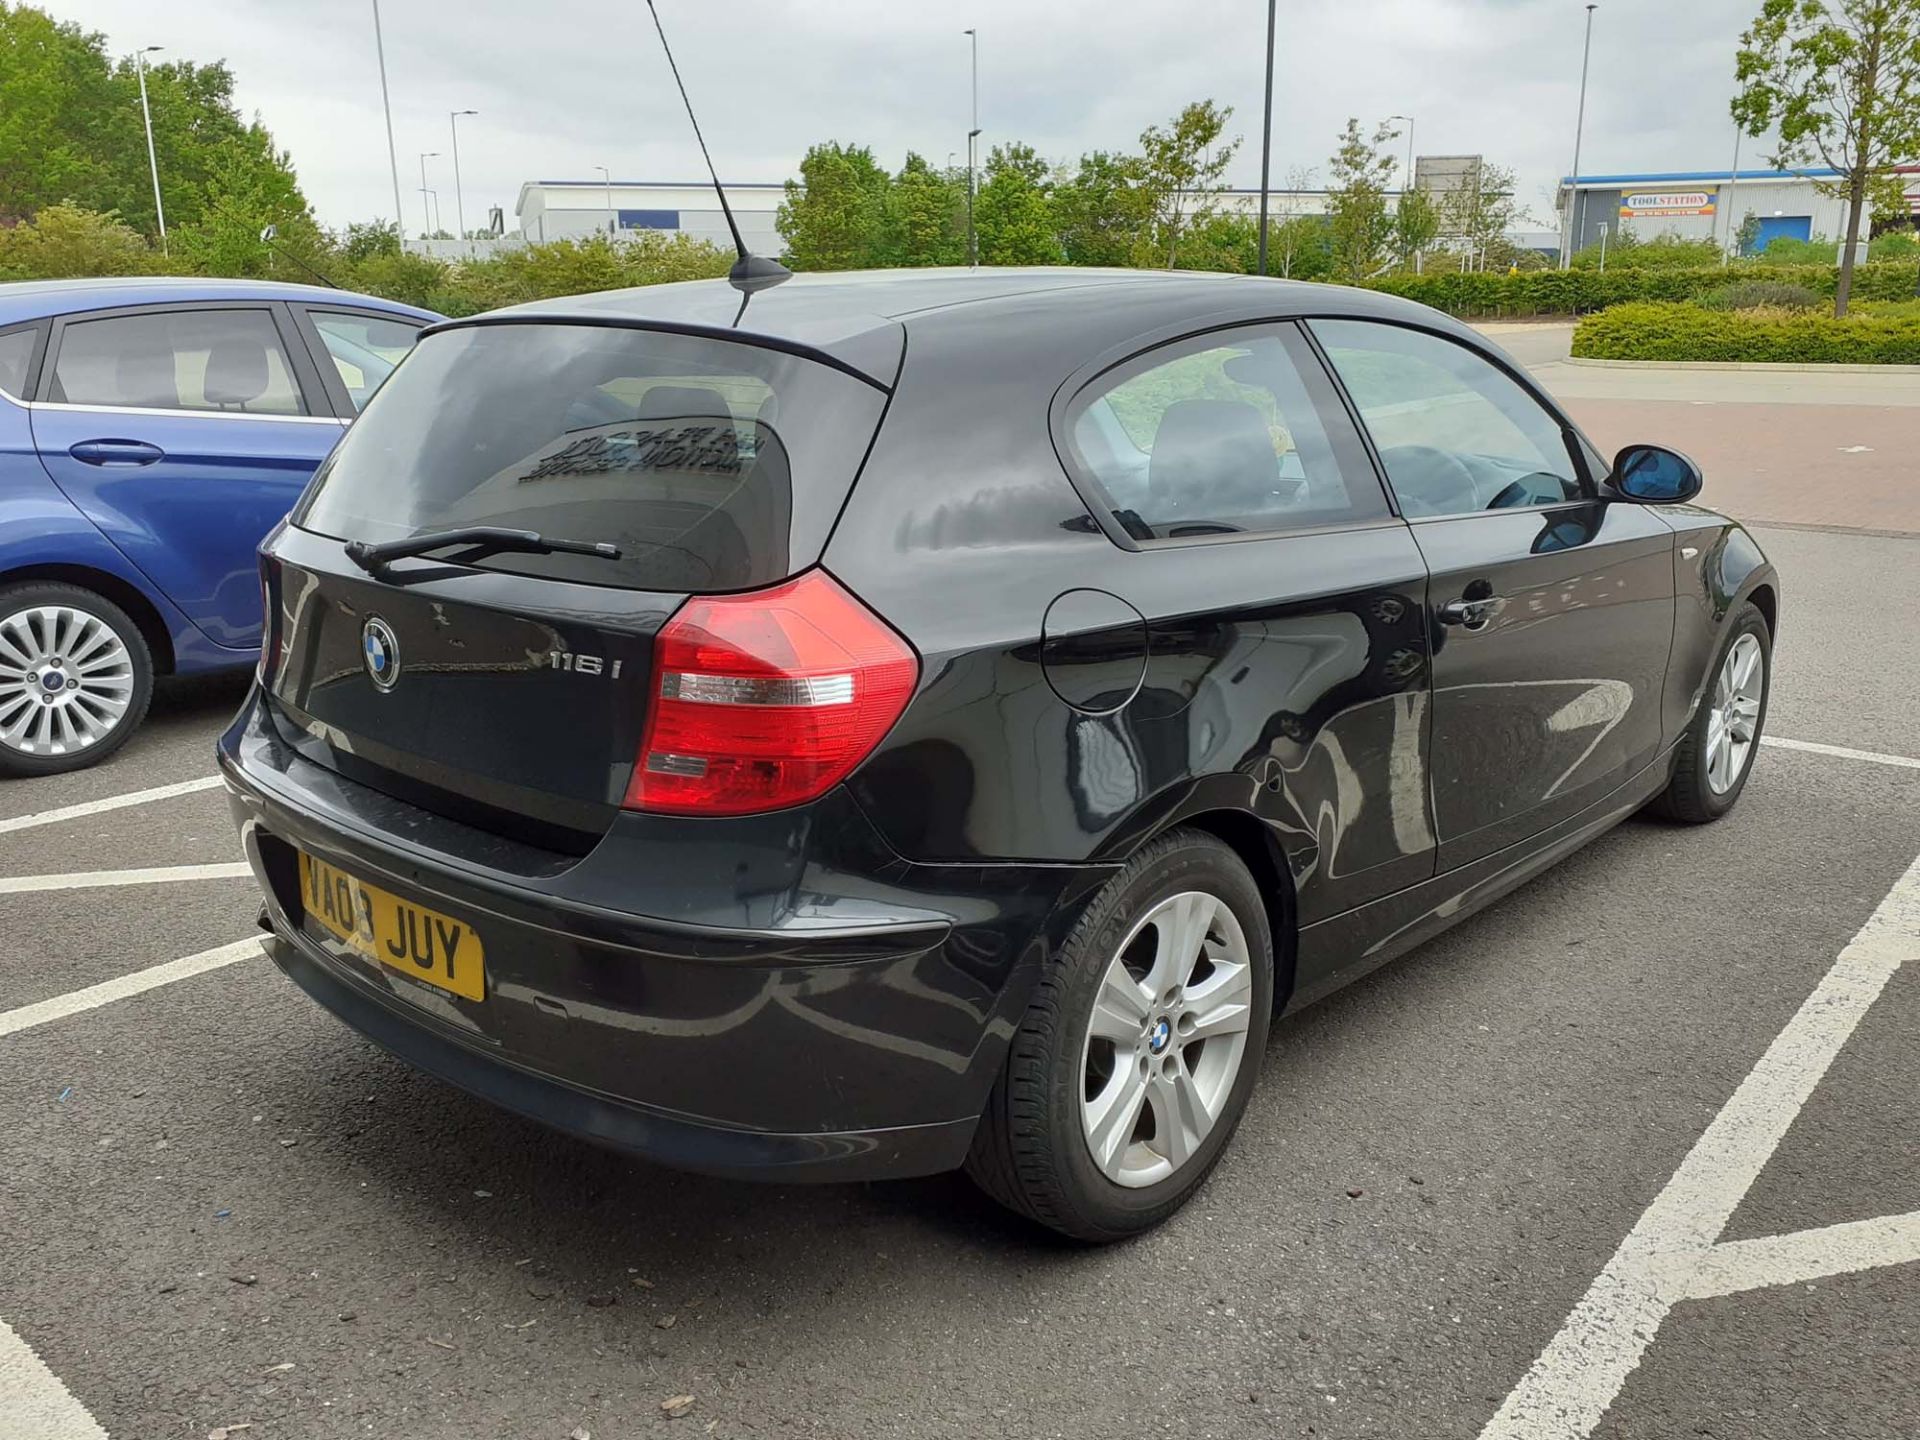 BMW 1161SE in black, registration VA08 JUY, 1600cc, petrol, with receipts and old MOT's, No V5 - Image 4 of 7